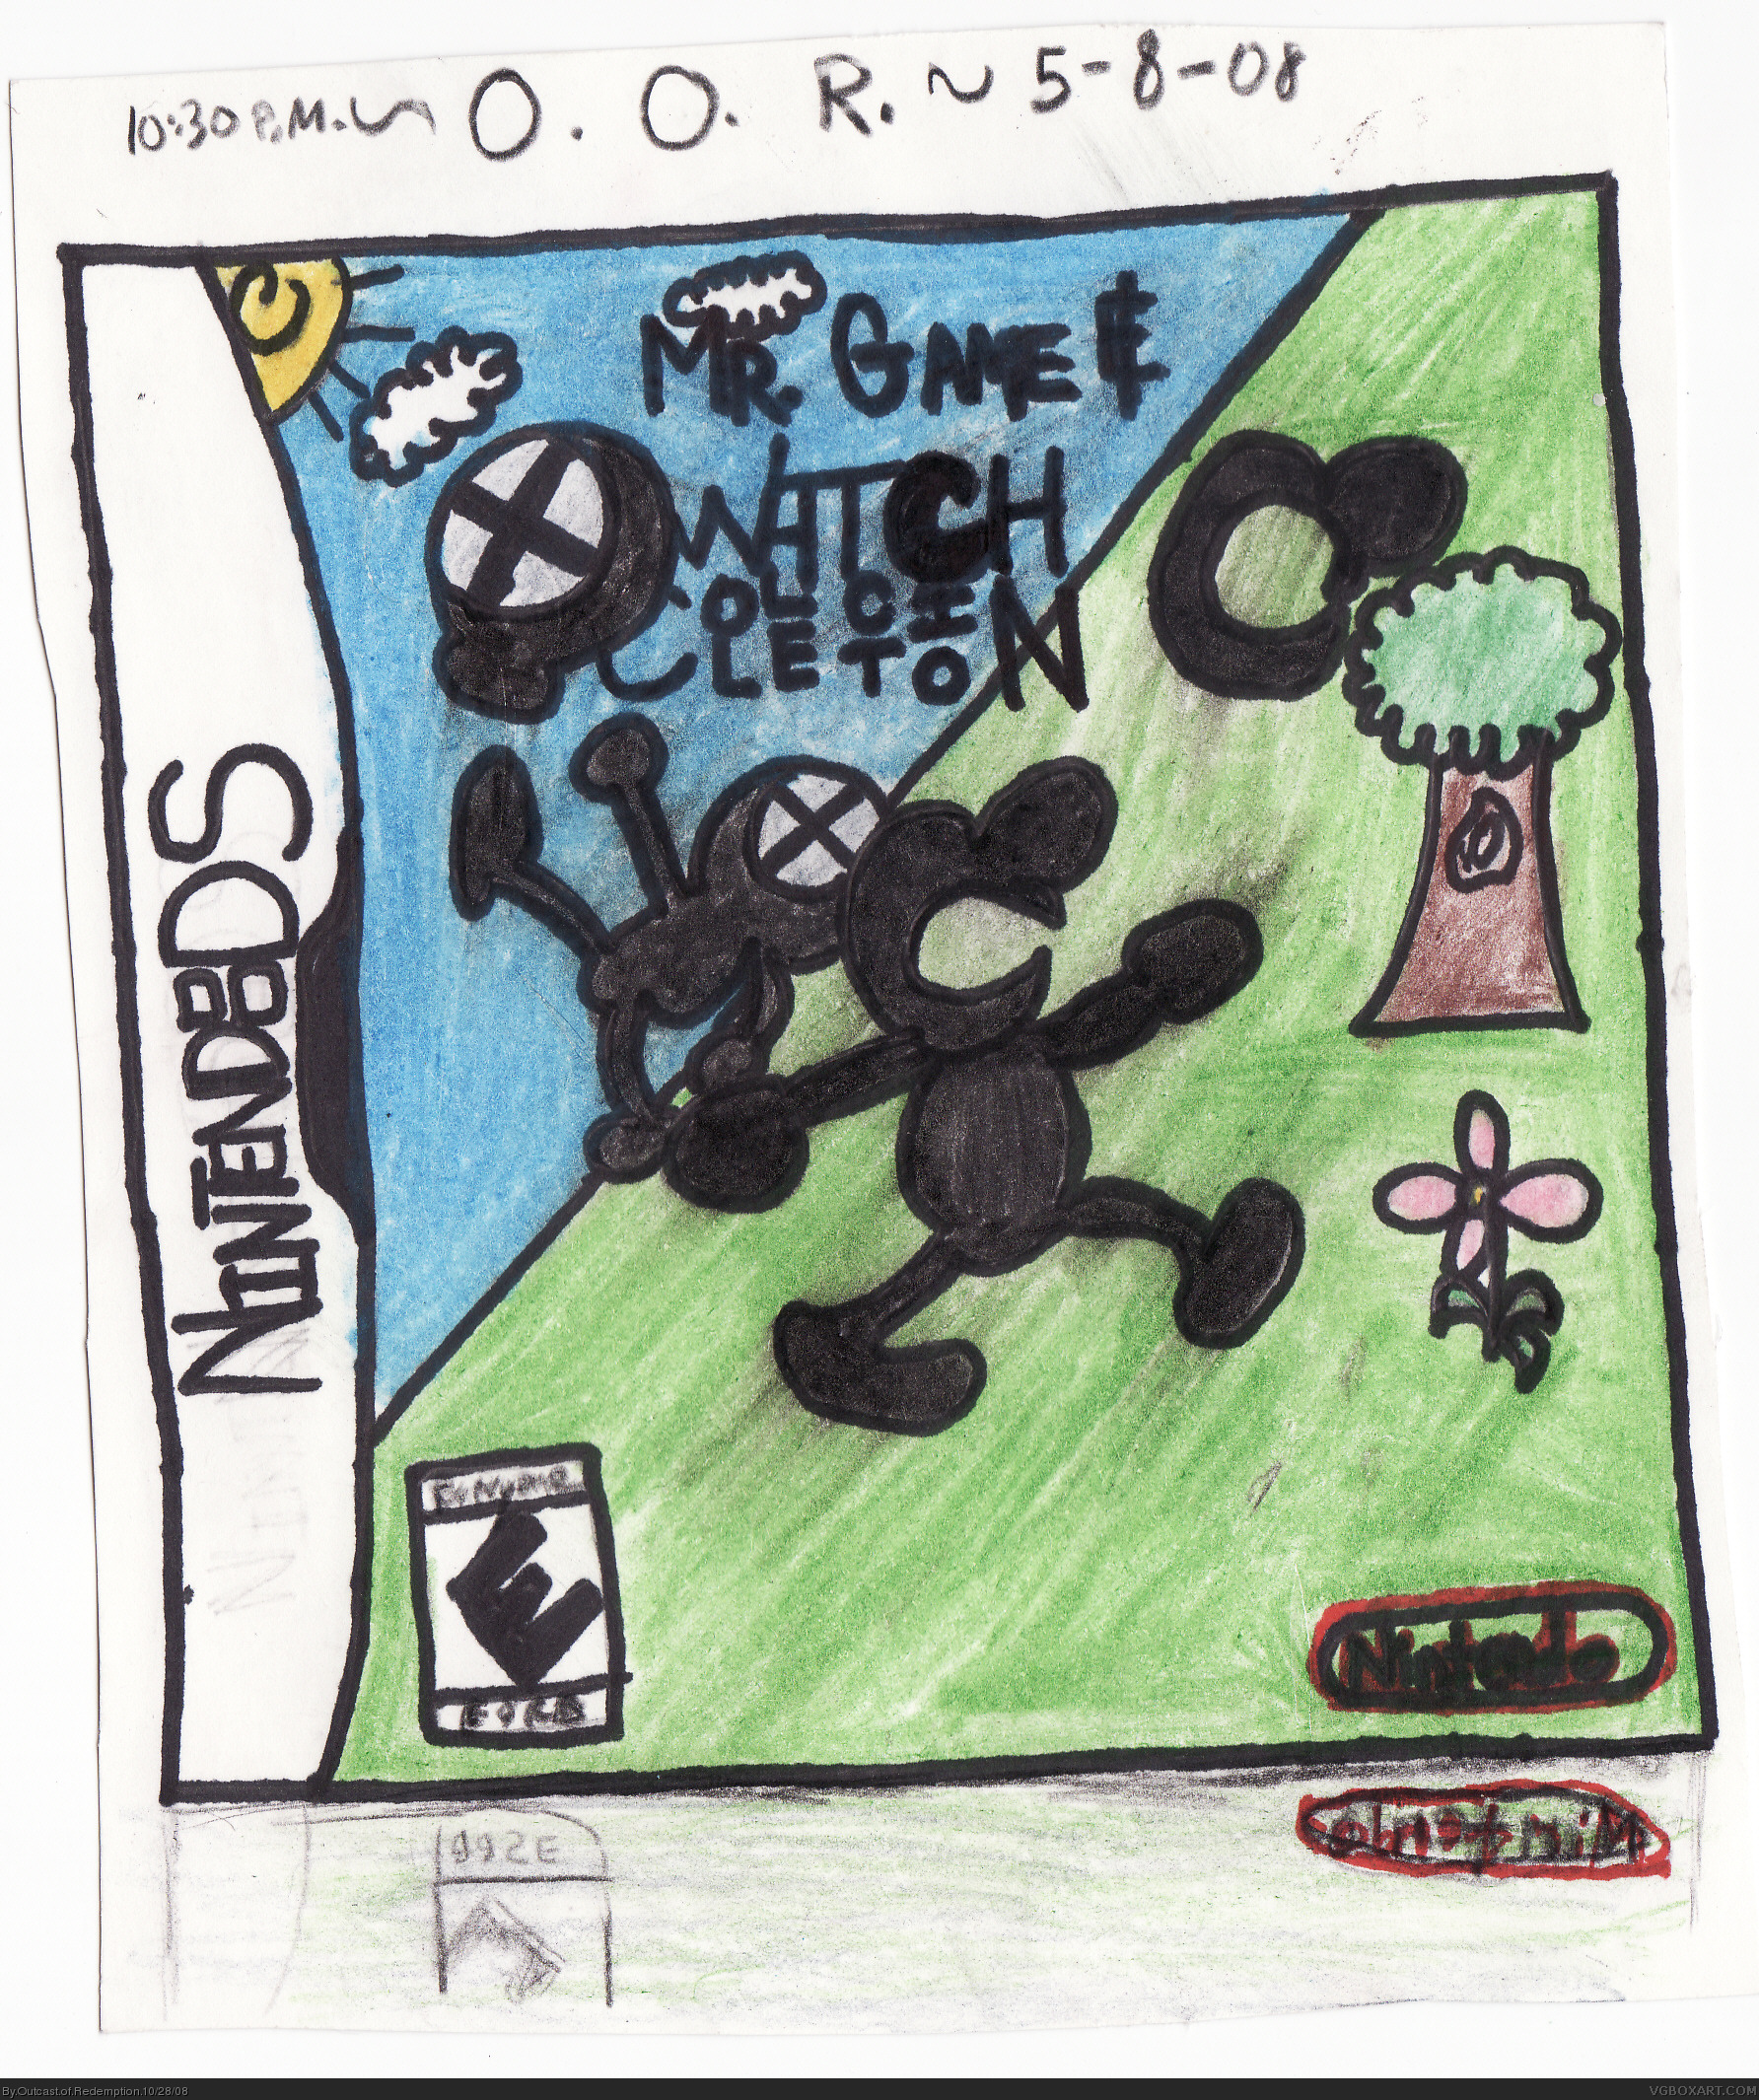 Mr. Game & Watch Collection box cover